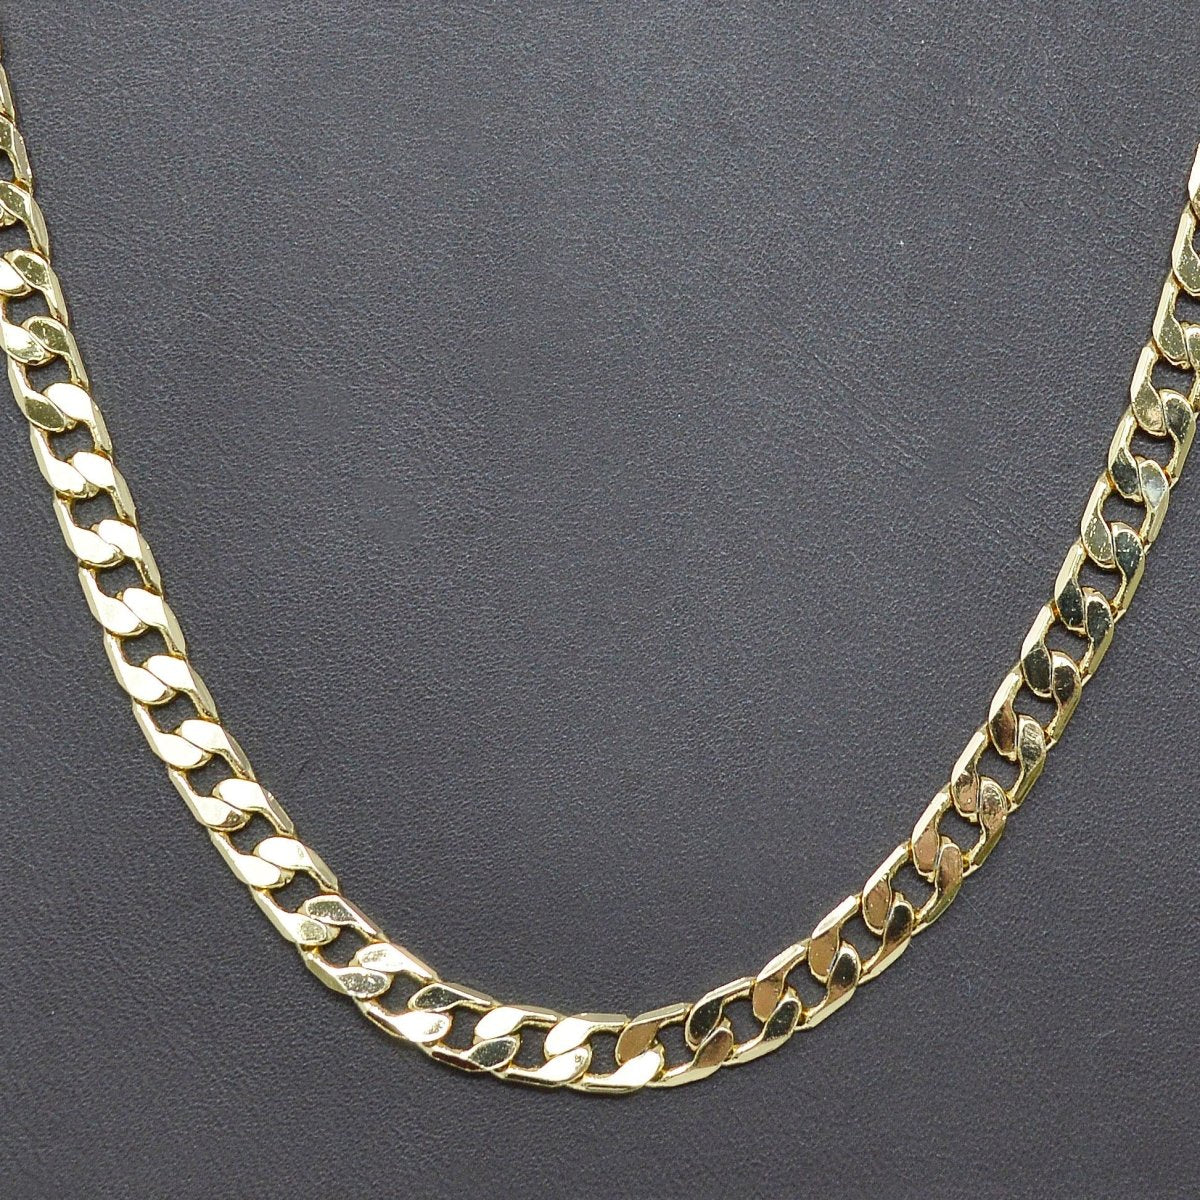 19.5 inch Ready to Use 14K Gold Filled Miami Cuban Curb Necklace Chain, Layering Chain, 5mm Curb Necklace w/ lobster Clasp | CN-1007 - DLUXCA